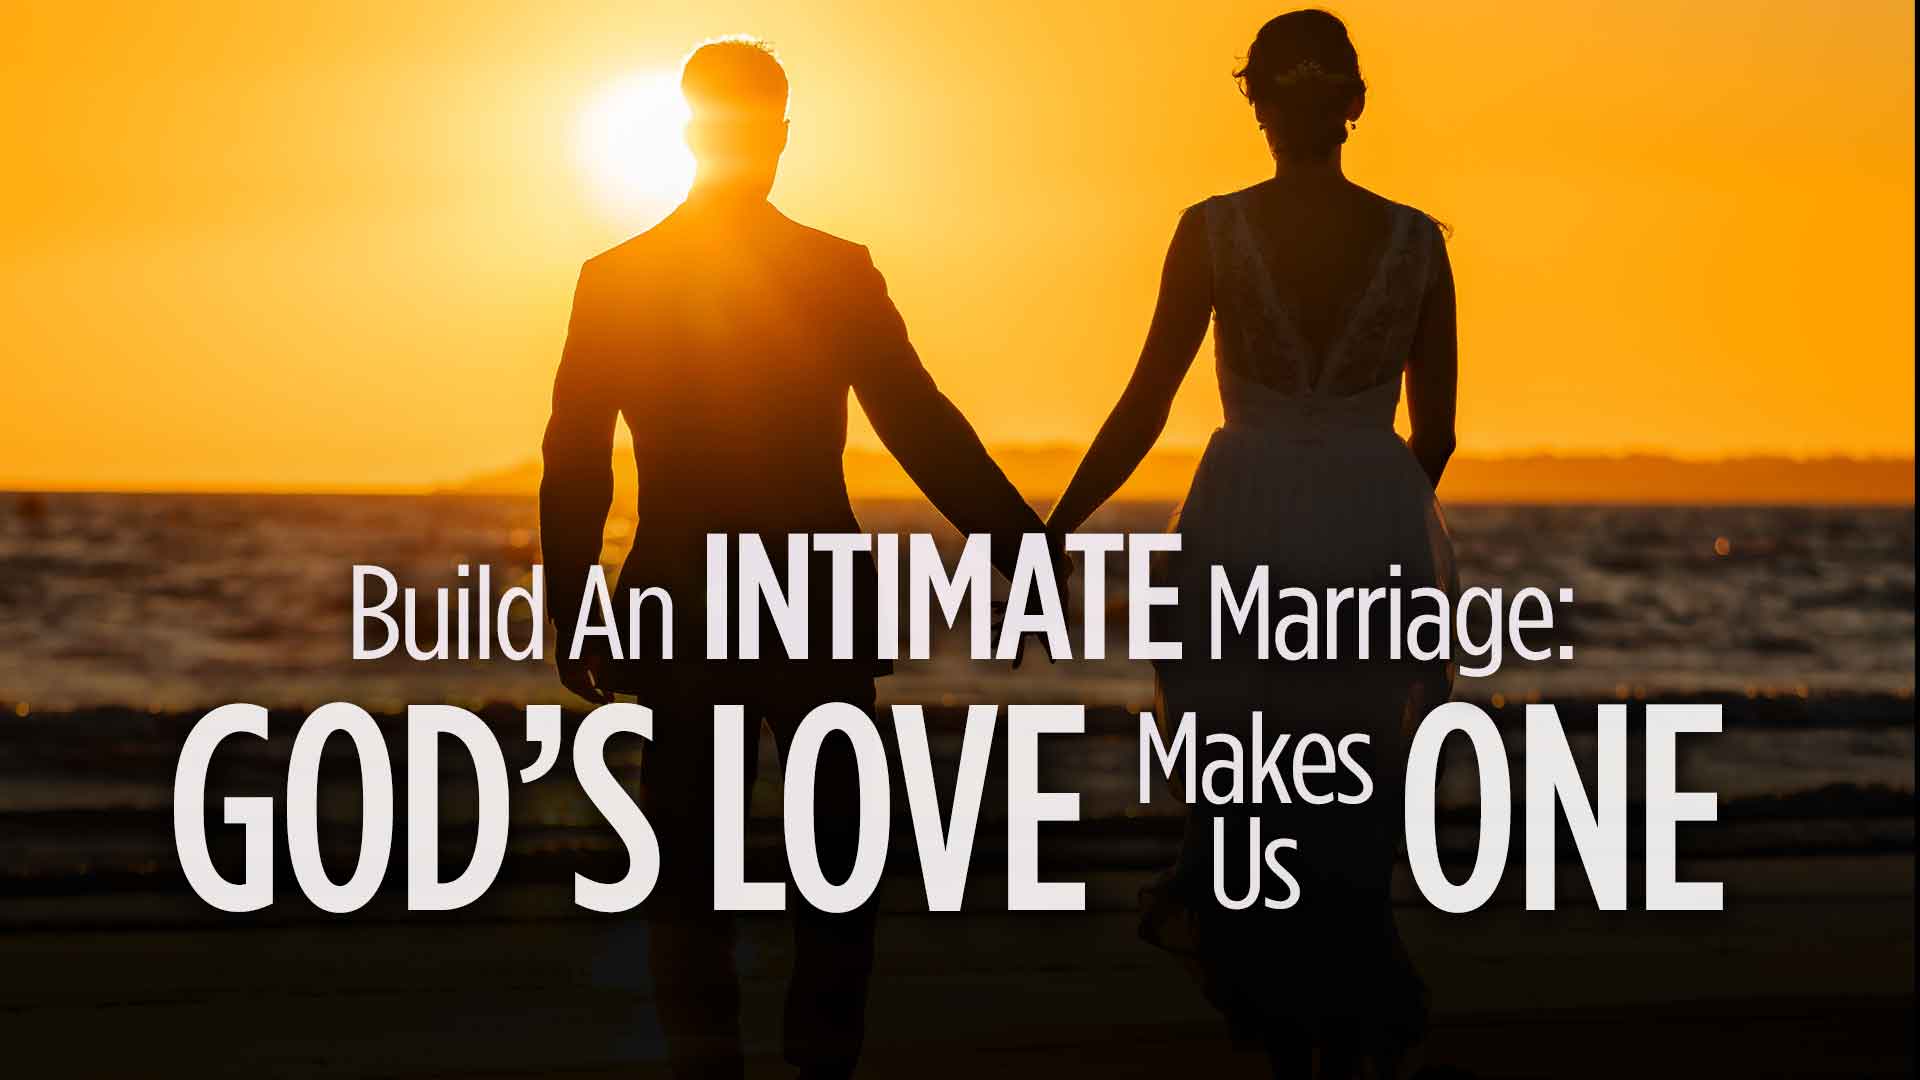 Build Intimate Marriage Gods Love Makes Us One 1920x1080